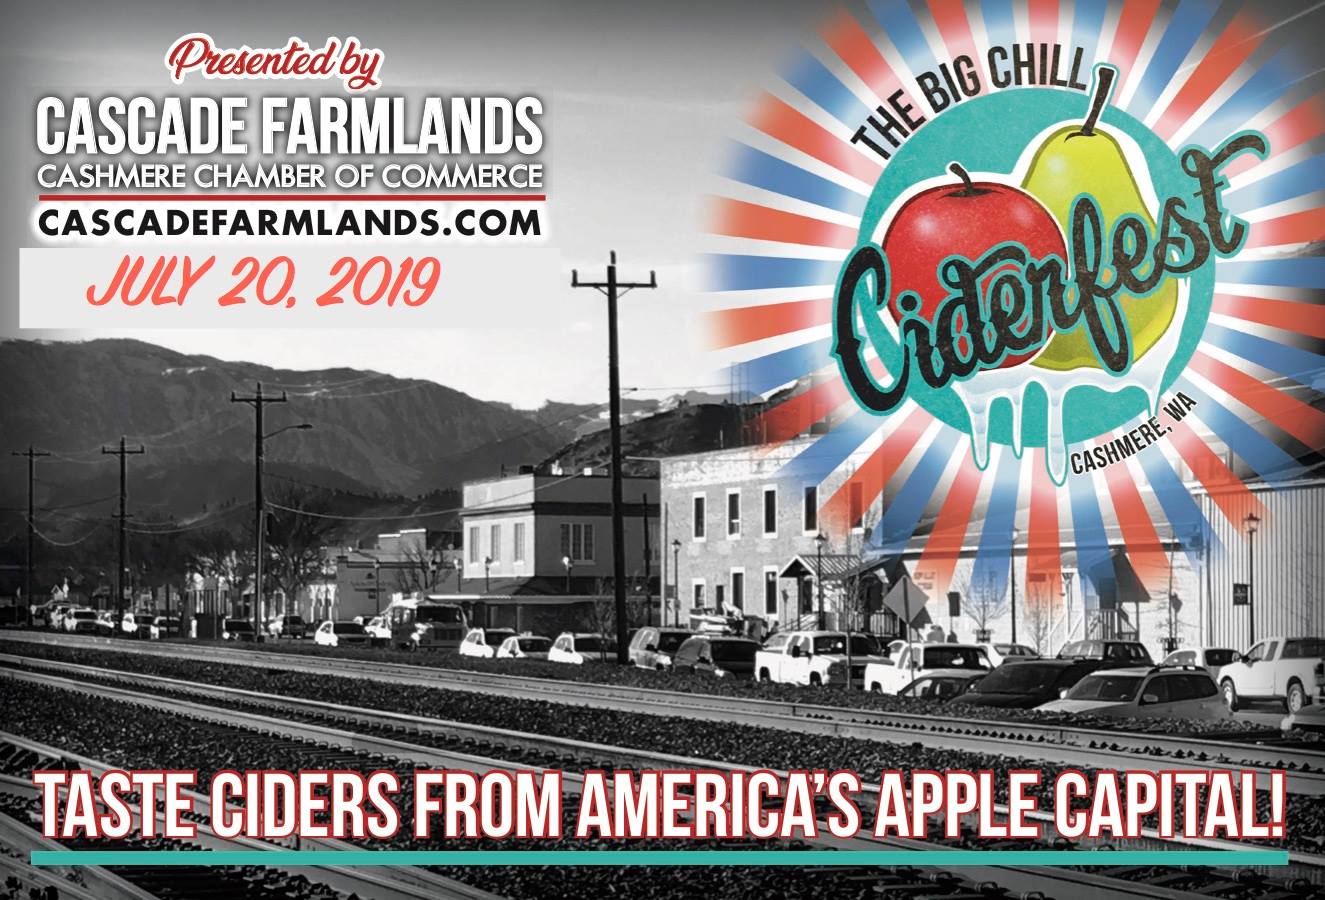 <h1 class="tribe-events-single-event-title">The Big Chill Ciderfest</h1>